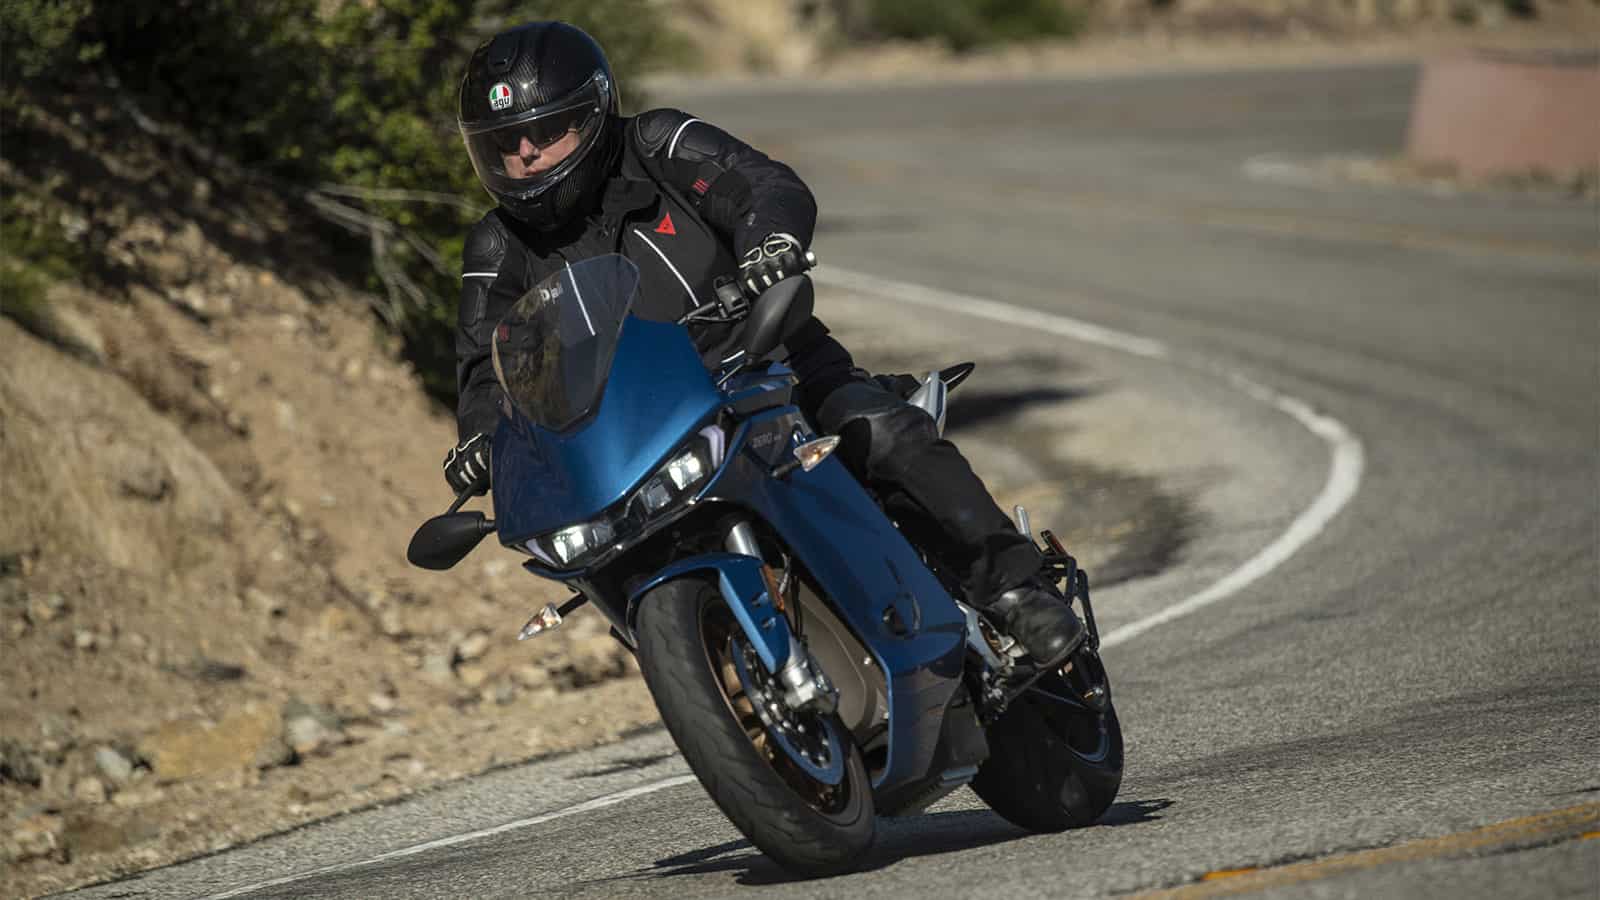 Do You Need A License To Ride An Electric Motorcycle?